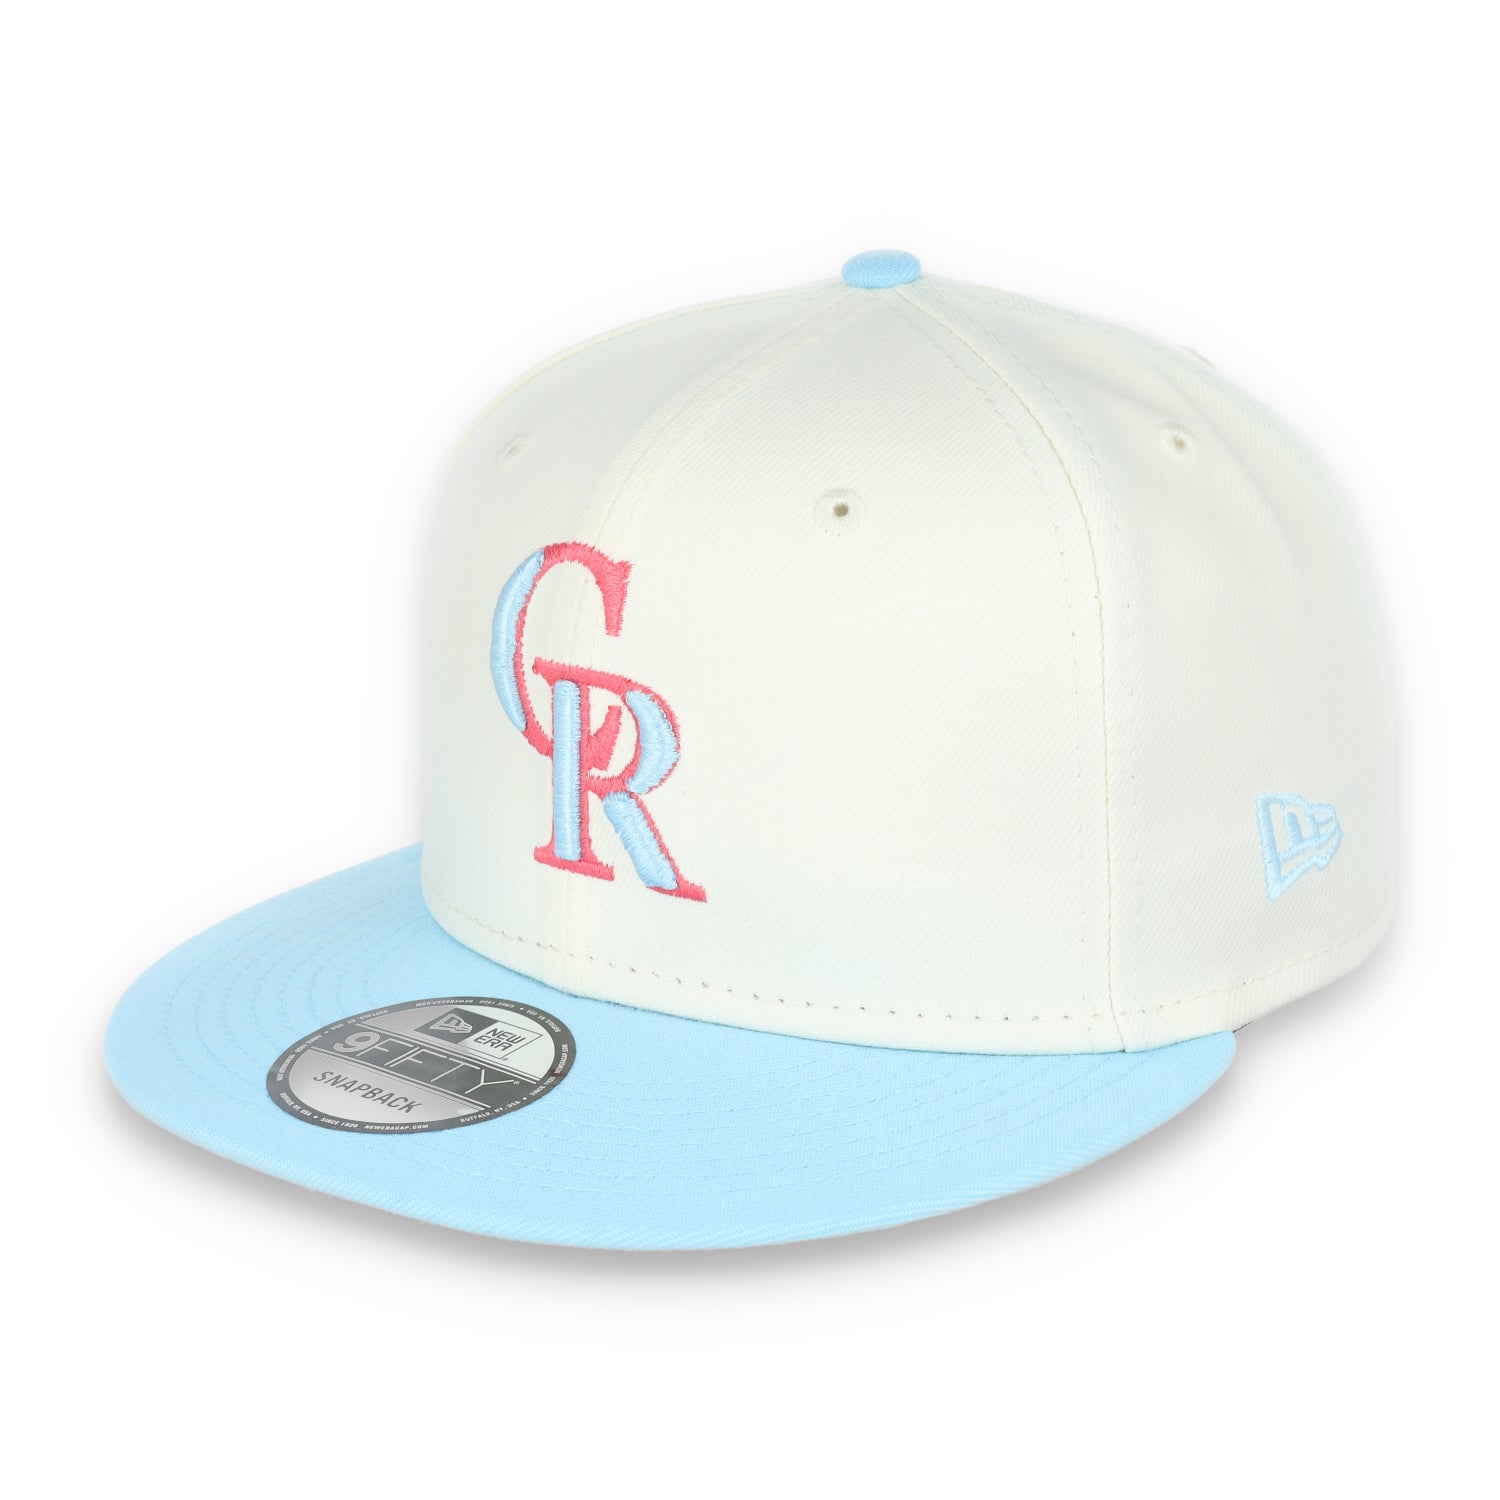 New Era Colorado Rockies 2-Tone Color Pack 9FIFTY Snapback Hat- Chrome/Baby Blue